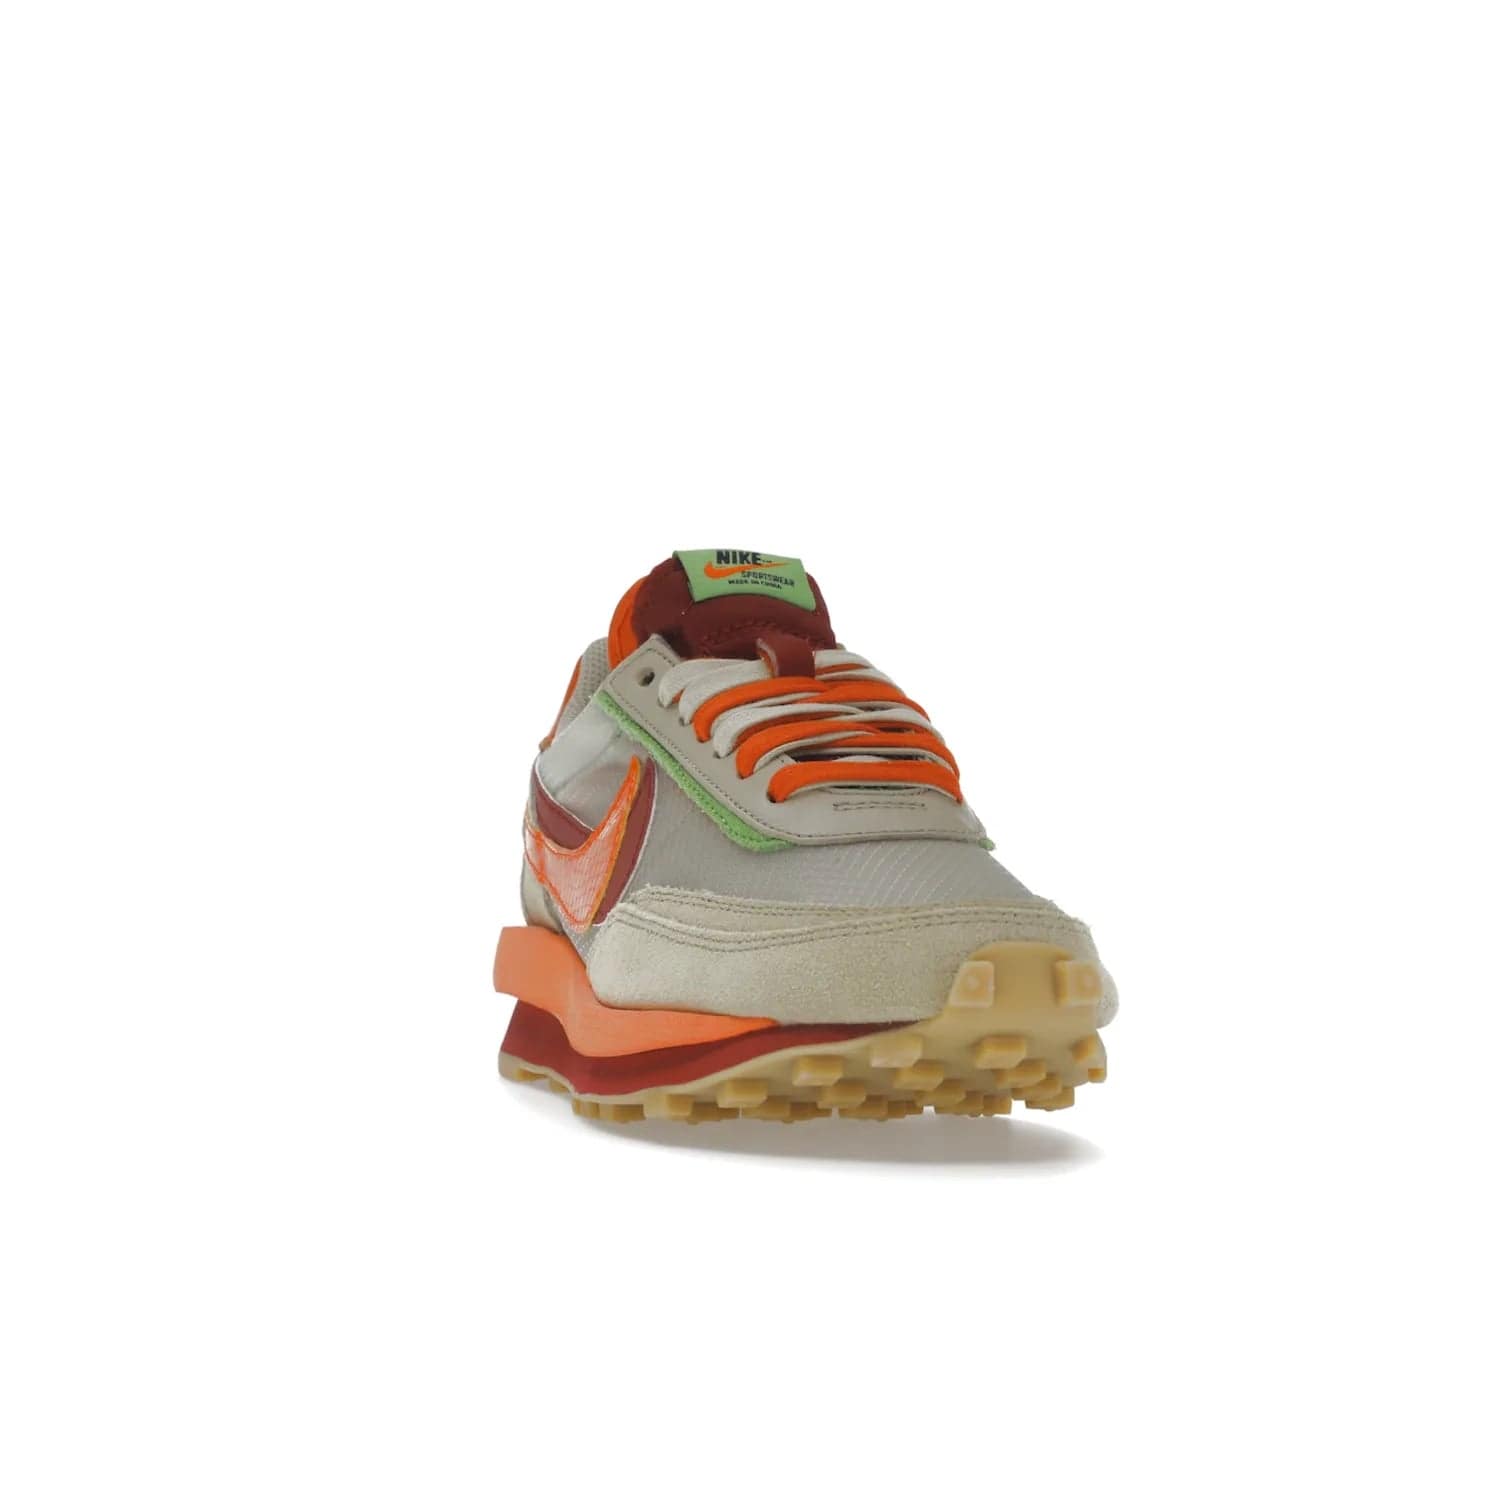 Nike LD Waffle sacai CLOT Kiss of Death Net Orange Blaze - Image 8 - Only at www.BallersClubKickz.com - A bold and stylish Nike LD Waffle sacai CLOT Kiss of Death Net Orange Blaze sneaker featuring a unique off-white, Deep Red & Orange Blaze Swooshes, two-toned stacked sole and doubled tongue. Available in September 2021. Make a statement.